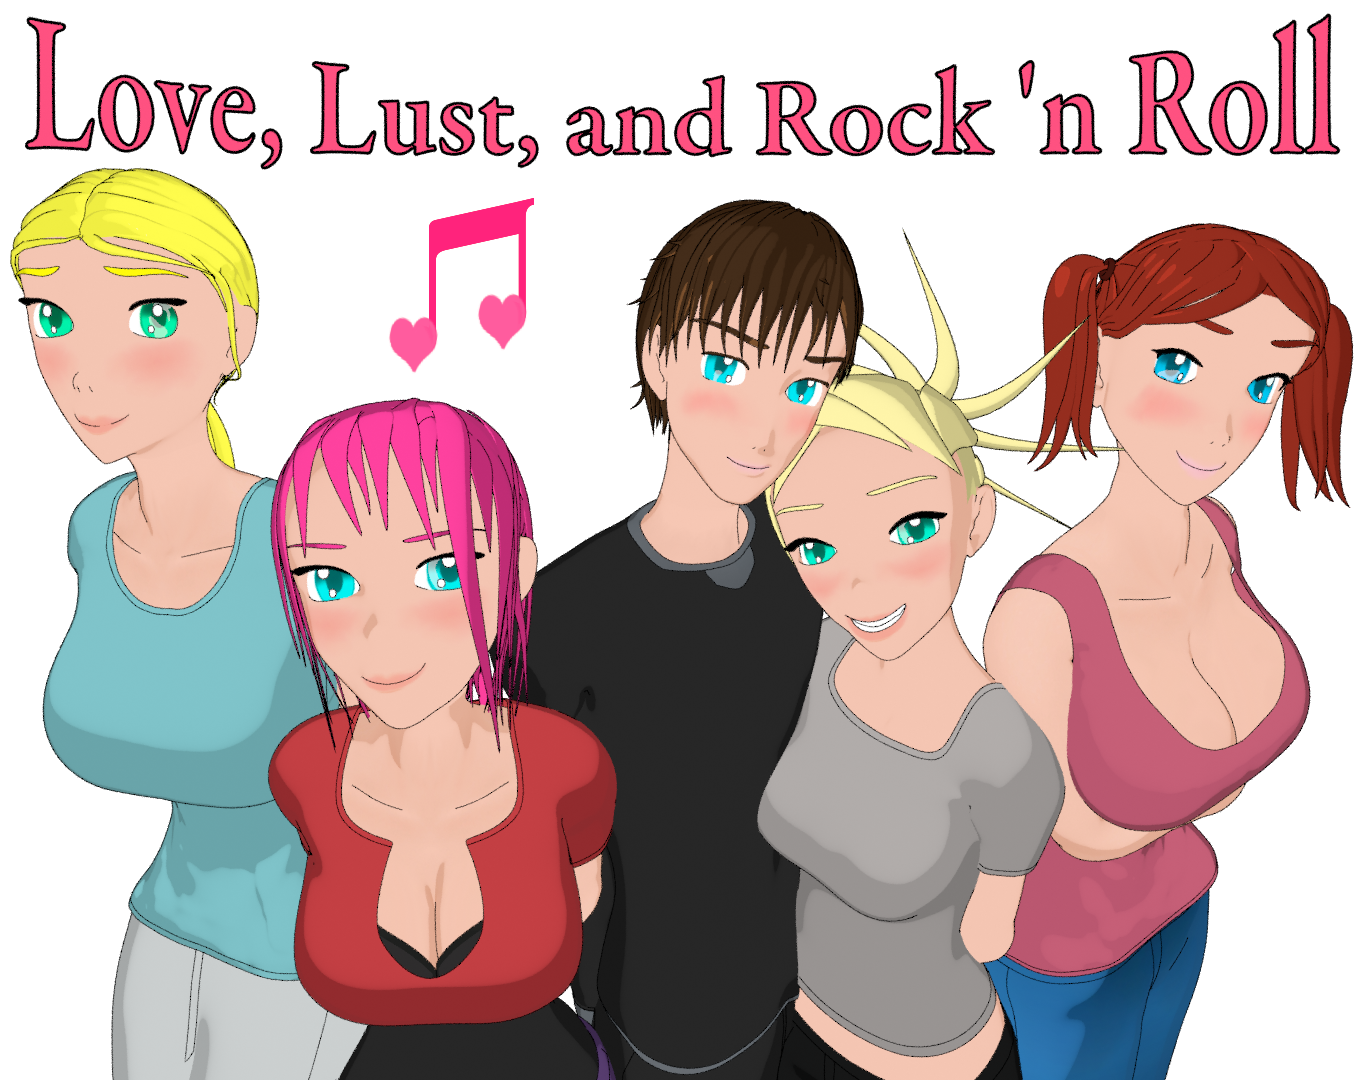 Love, Lust, and Rock 'n Roll